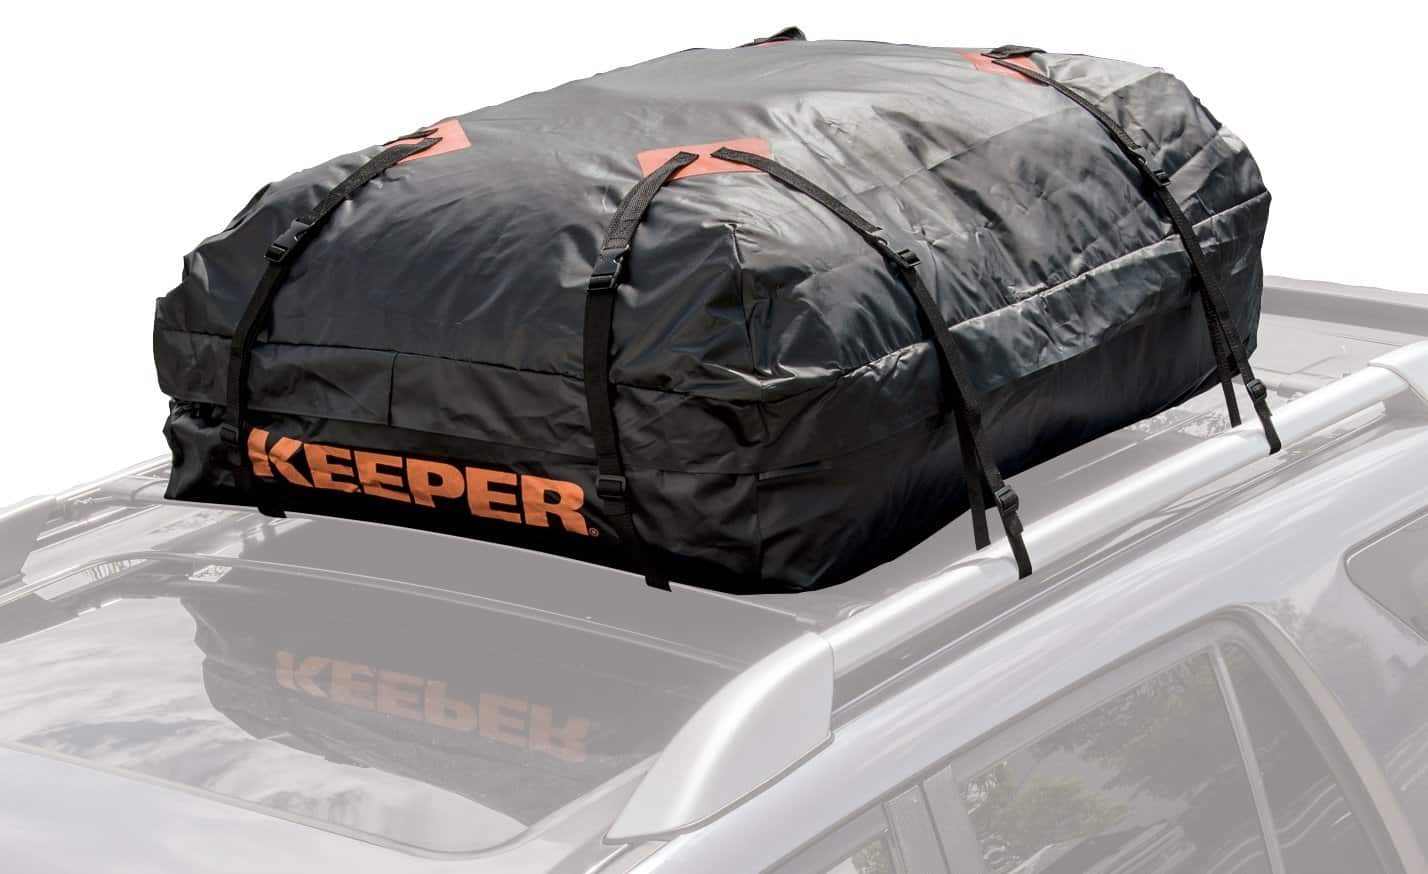 Cargo Roof Bag Fits All Cars Cross Bars or No Rack with Side Rails YOULERBU Rooftop Cargo Carrier Bag 16 Cubic Feet Car Roof Top Carrier Bag with Car Roof Protective Mat and Lock 